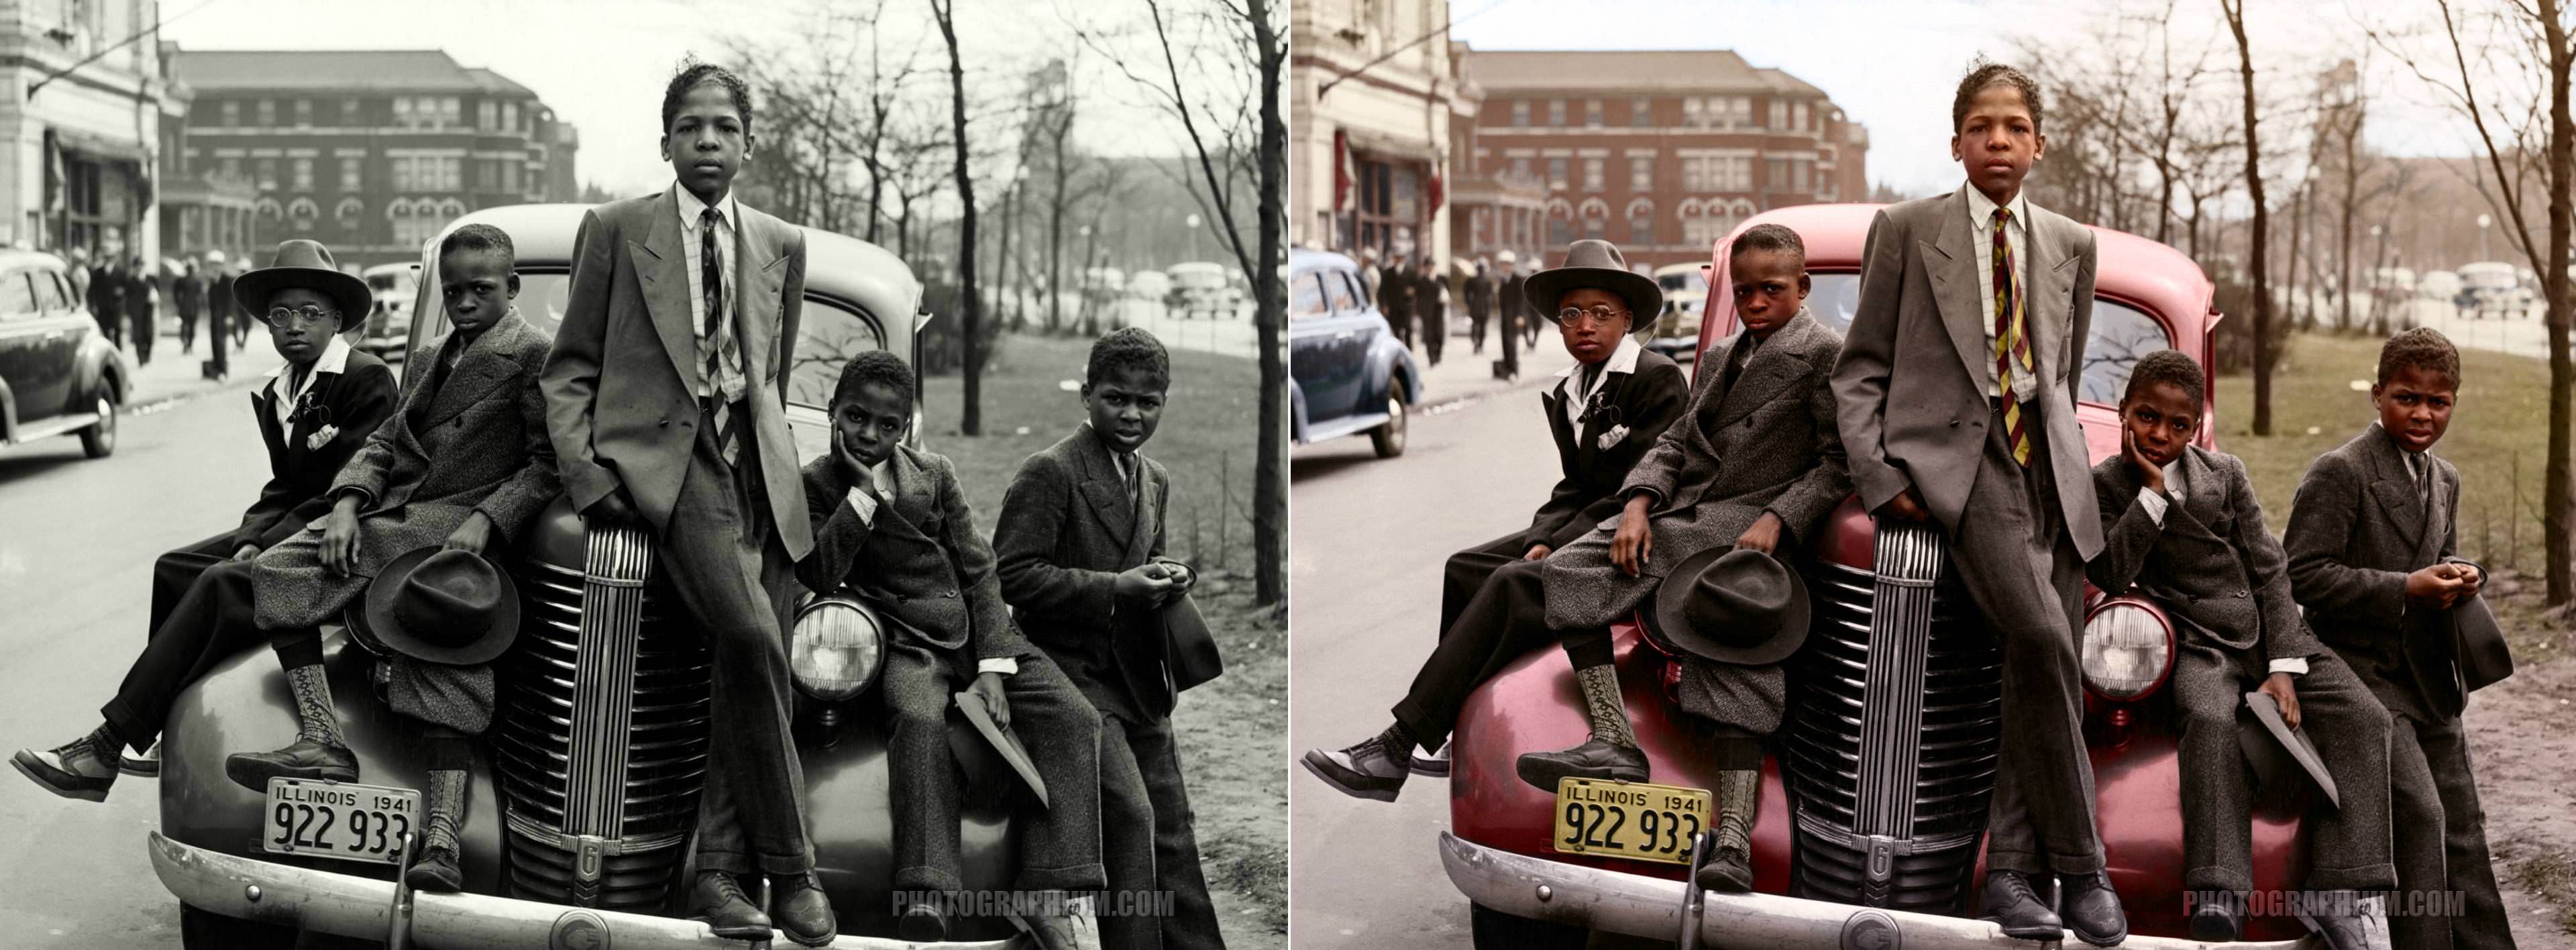 Boys in Chicago, US in 1941.